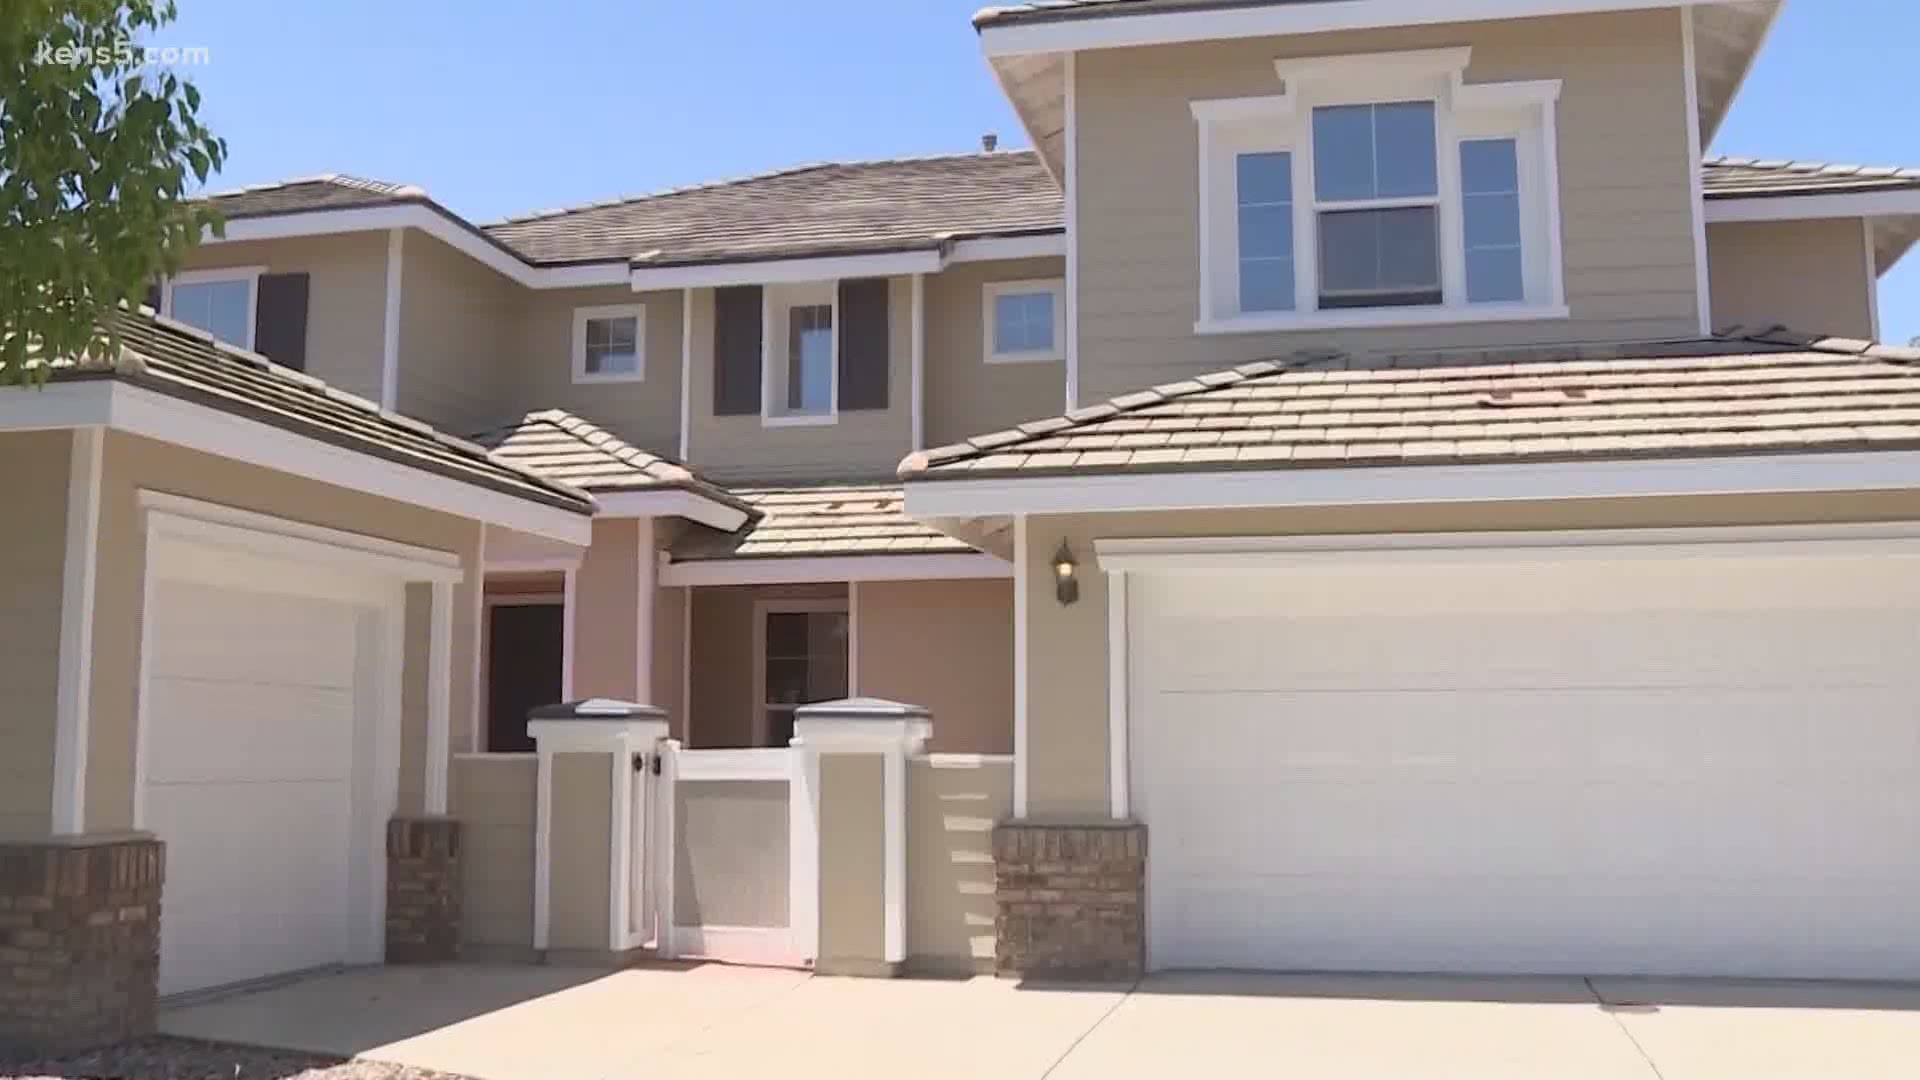 If you are thinking about buying a home for the first time during the pandemic, here’s KENS 5’s top five things to consider before you make your move.